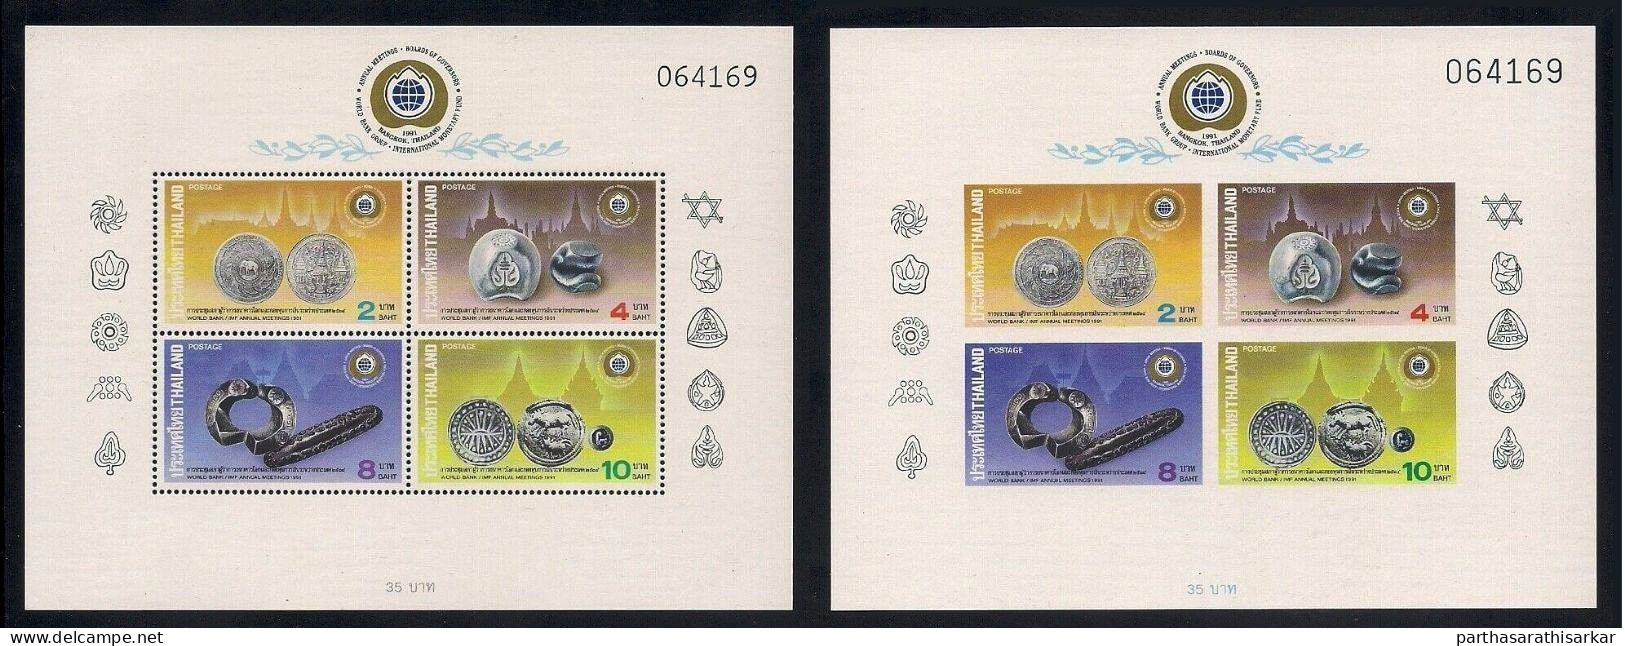 THAILAND 1991 ANCIENT COINAGE COINS PERF IMPERF SAME NO MINIATURE SHEET MS SET MNH - Monete